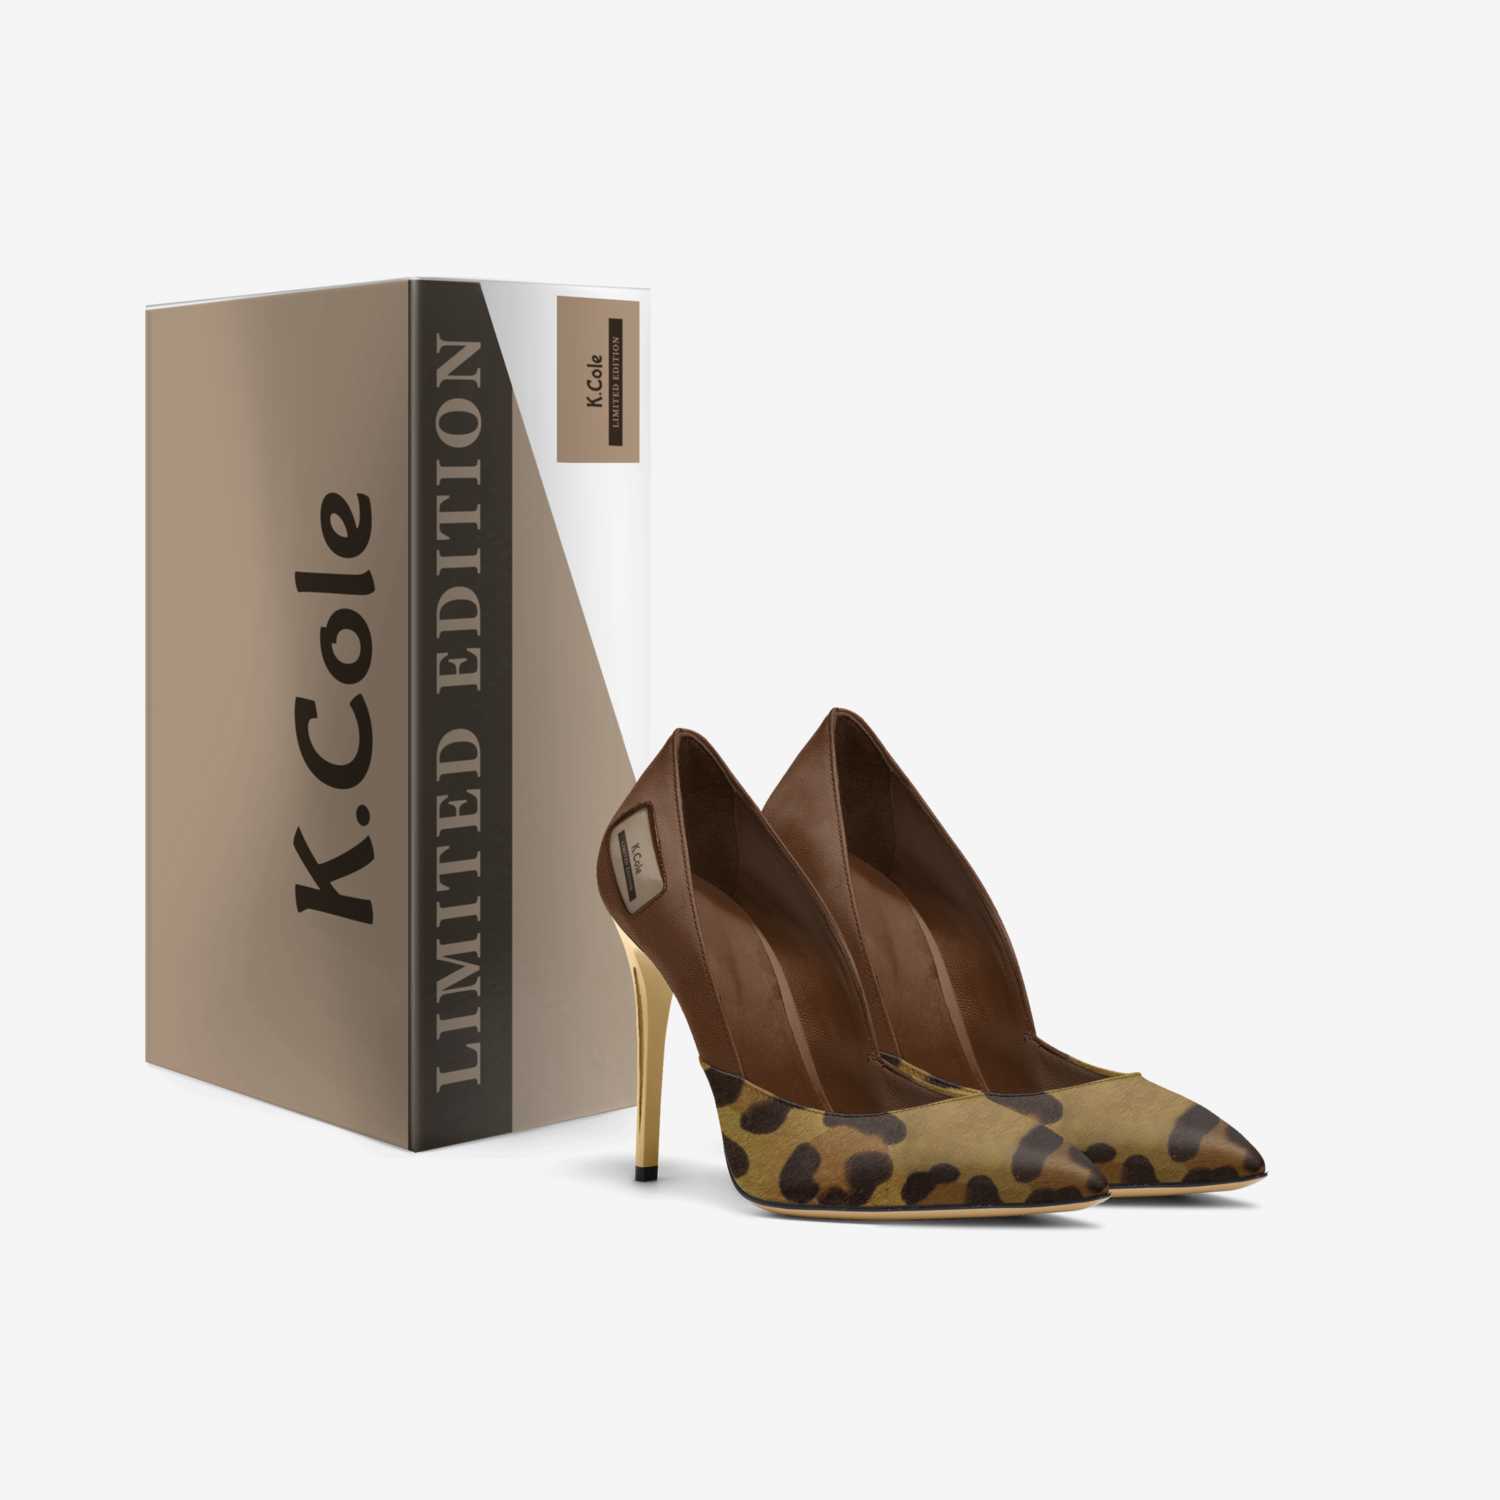 K.Cole custom made in Italy shoes by Majestic | Box view